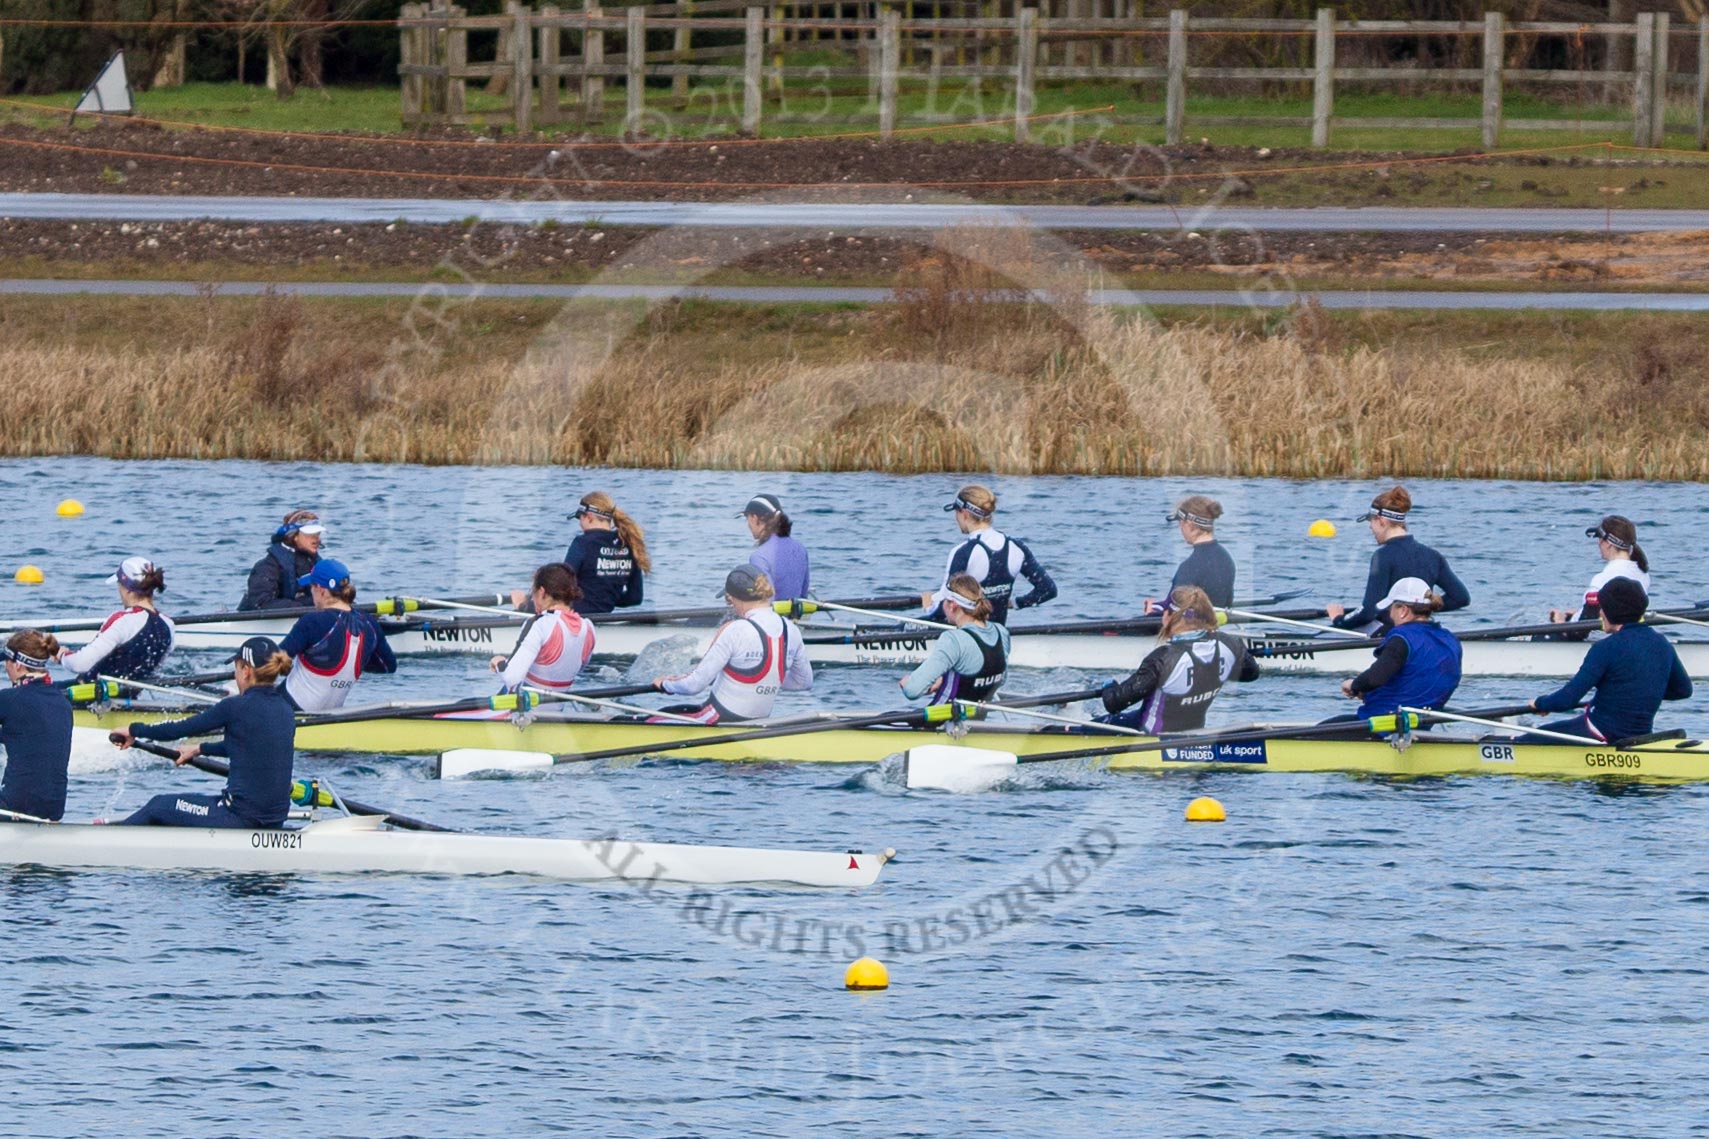 The Boat Race season 2013 - fixture OUWBC vs Olympians: The Olympians, in the yellow boat, racing the two OUWBC boats in a fixture at Dorney Lake. In front the Blue Boat, behind the reserve boat Osiris..
Dorney Lake,
Dorney, Windsor,
Buckinghamshire,
United Kingdom,
on 16 March 2013 at 12:16, image #202